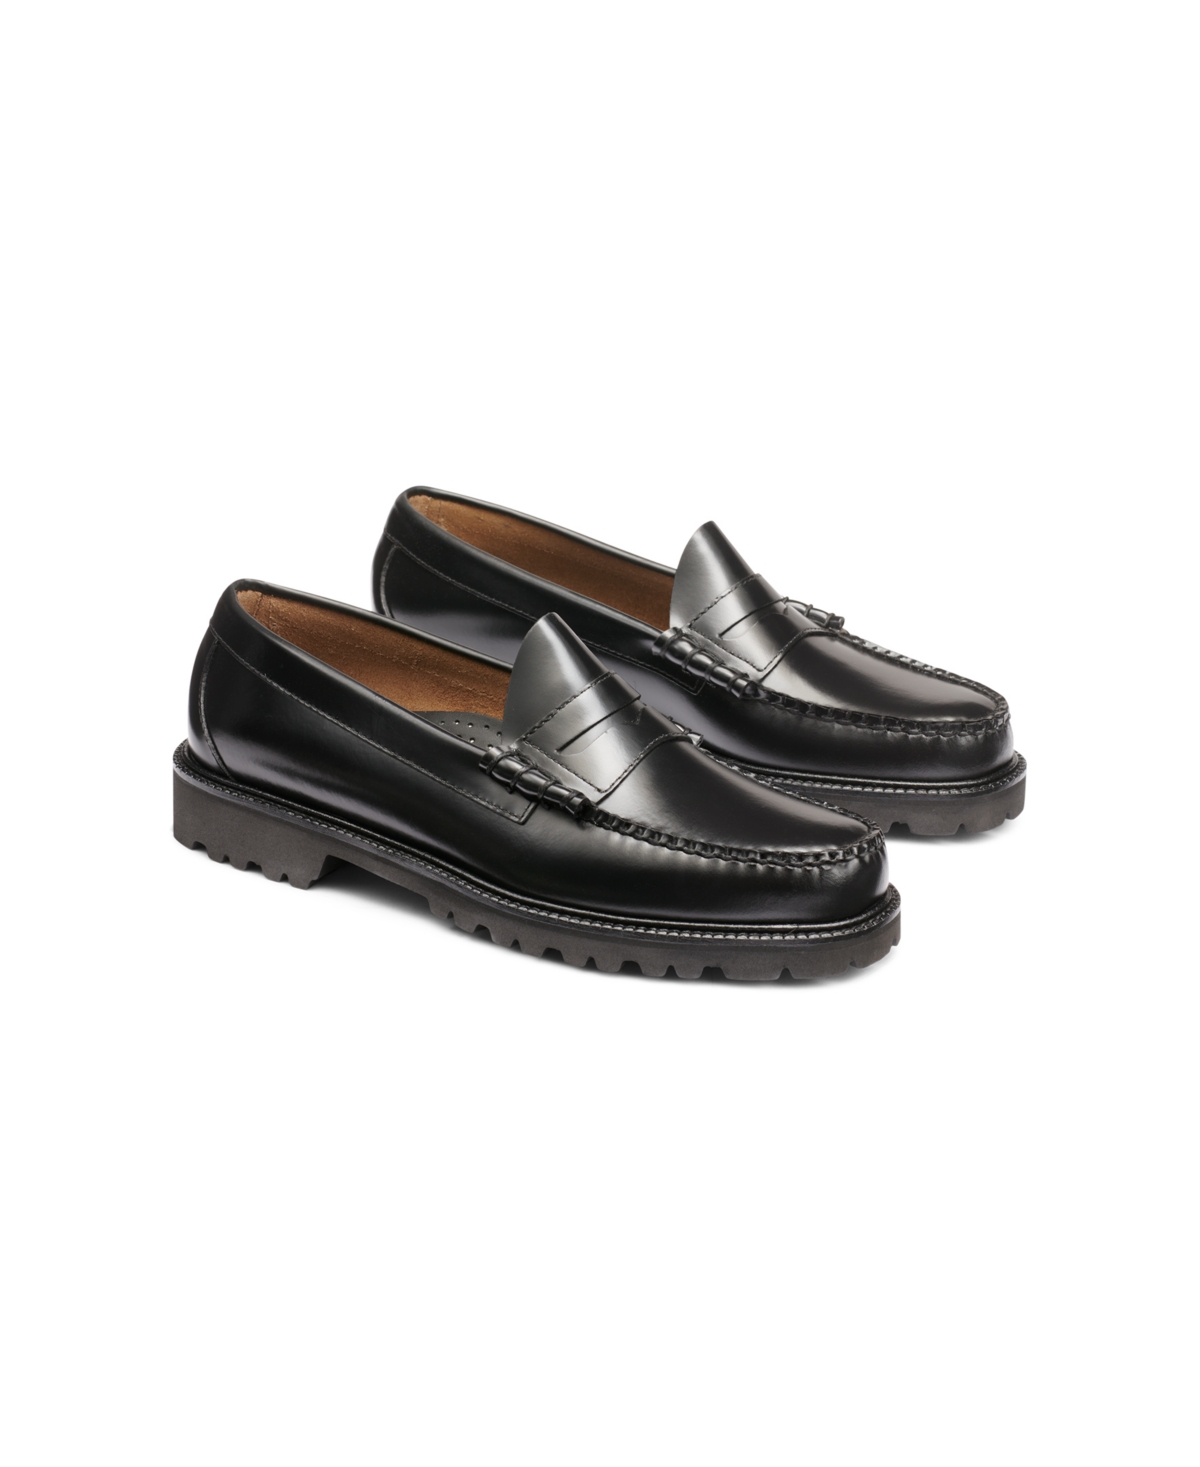 Gh Bass G.h.bass Men's Larson Lug Weejuns Penny Loafers In Black